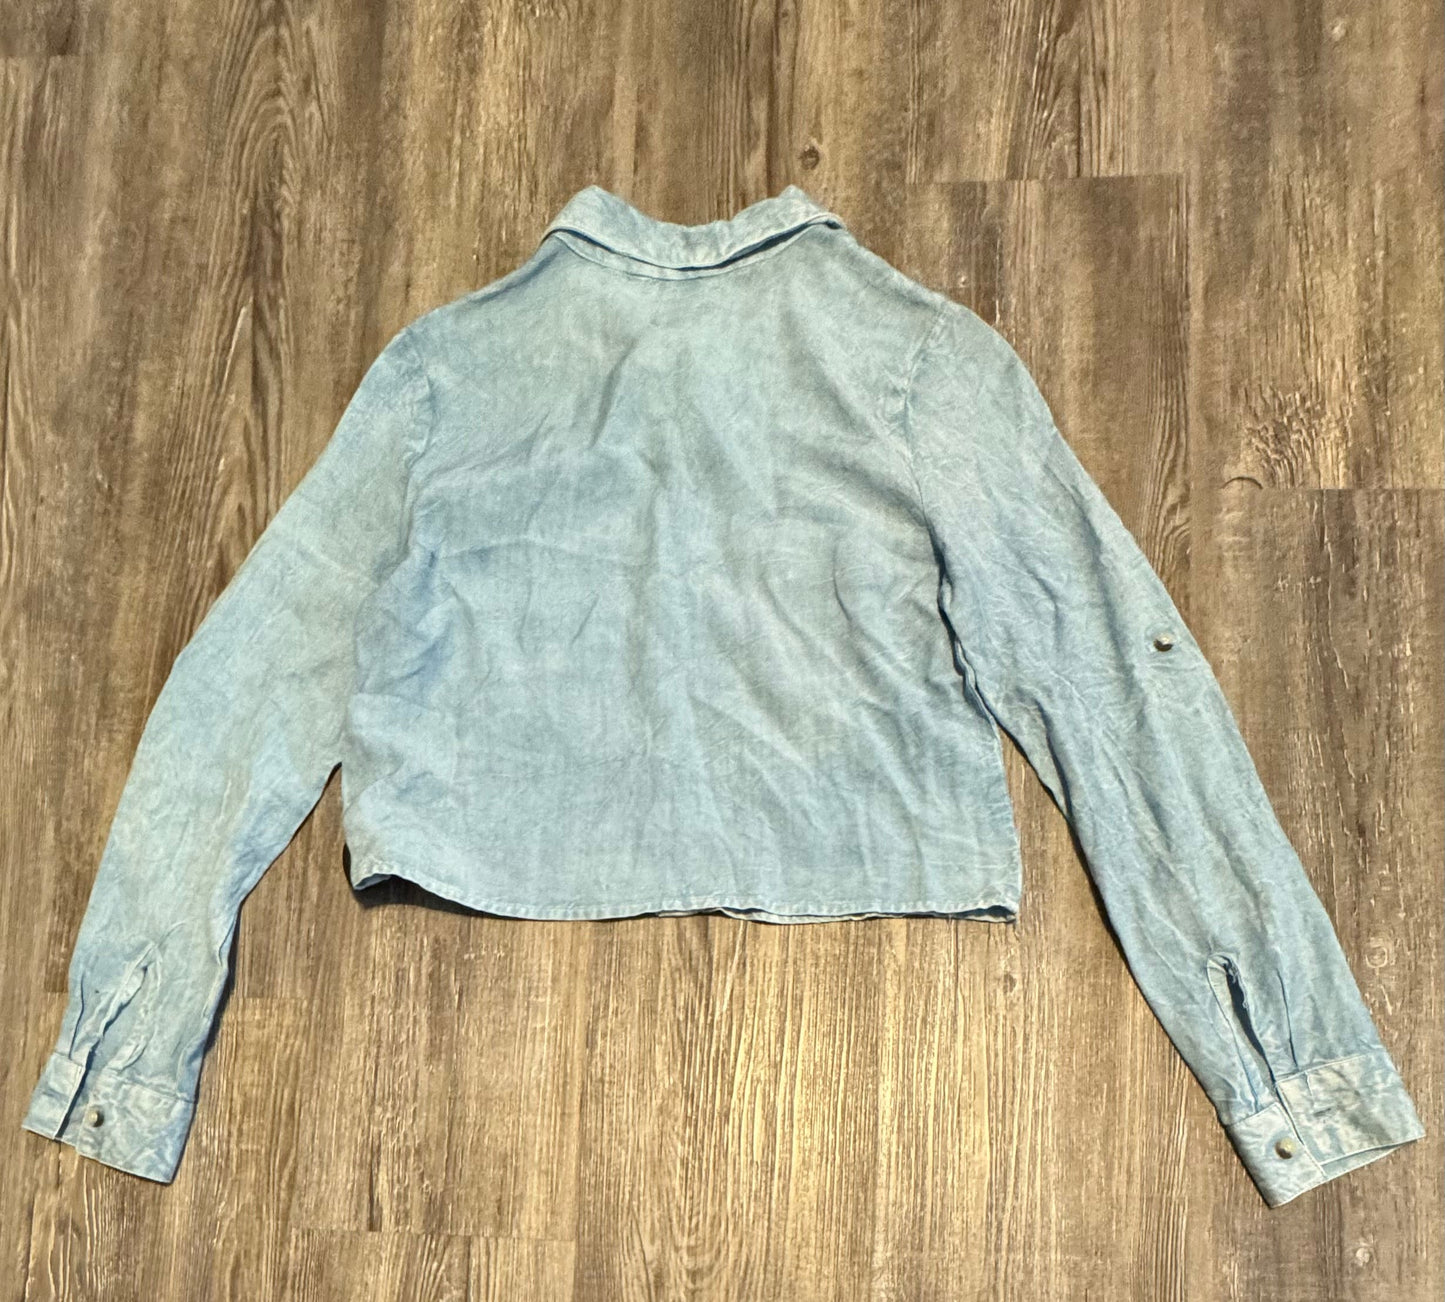 Top Long Sleeve By Clothes Mentor  Size: Xs